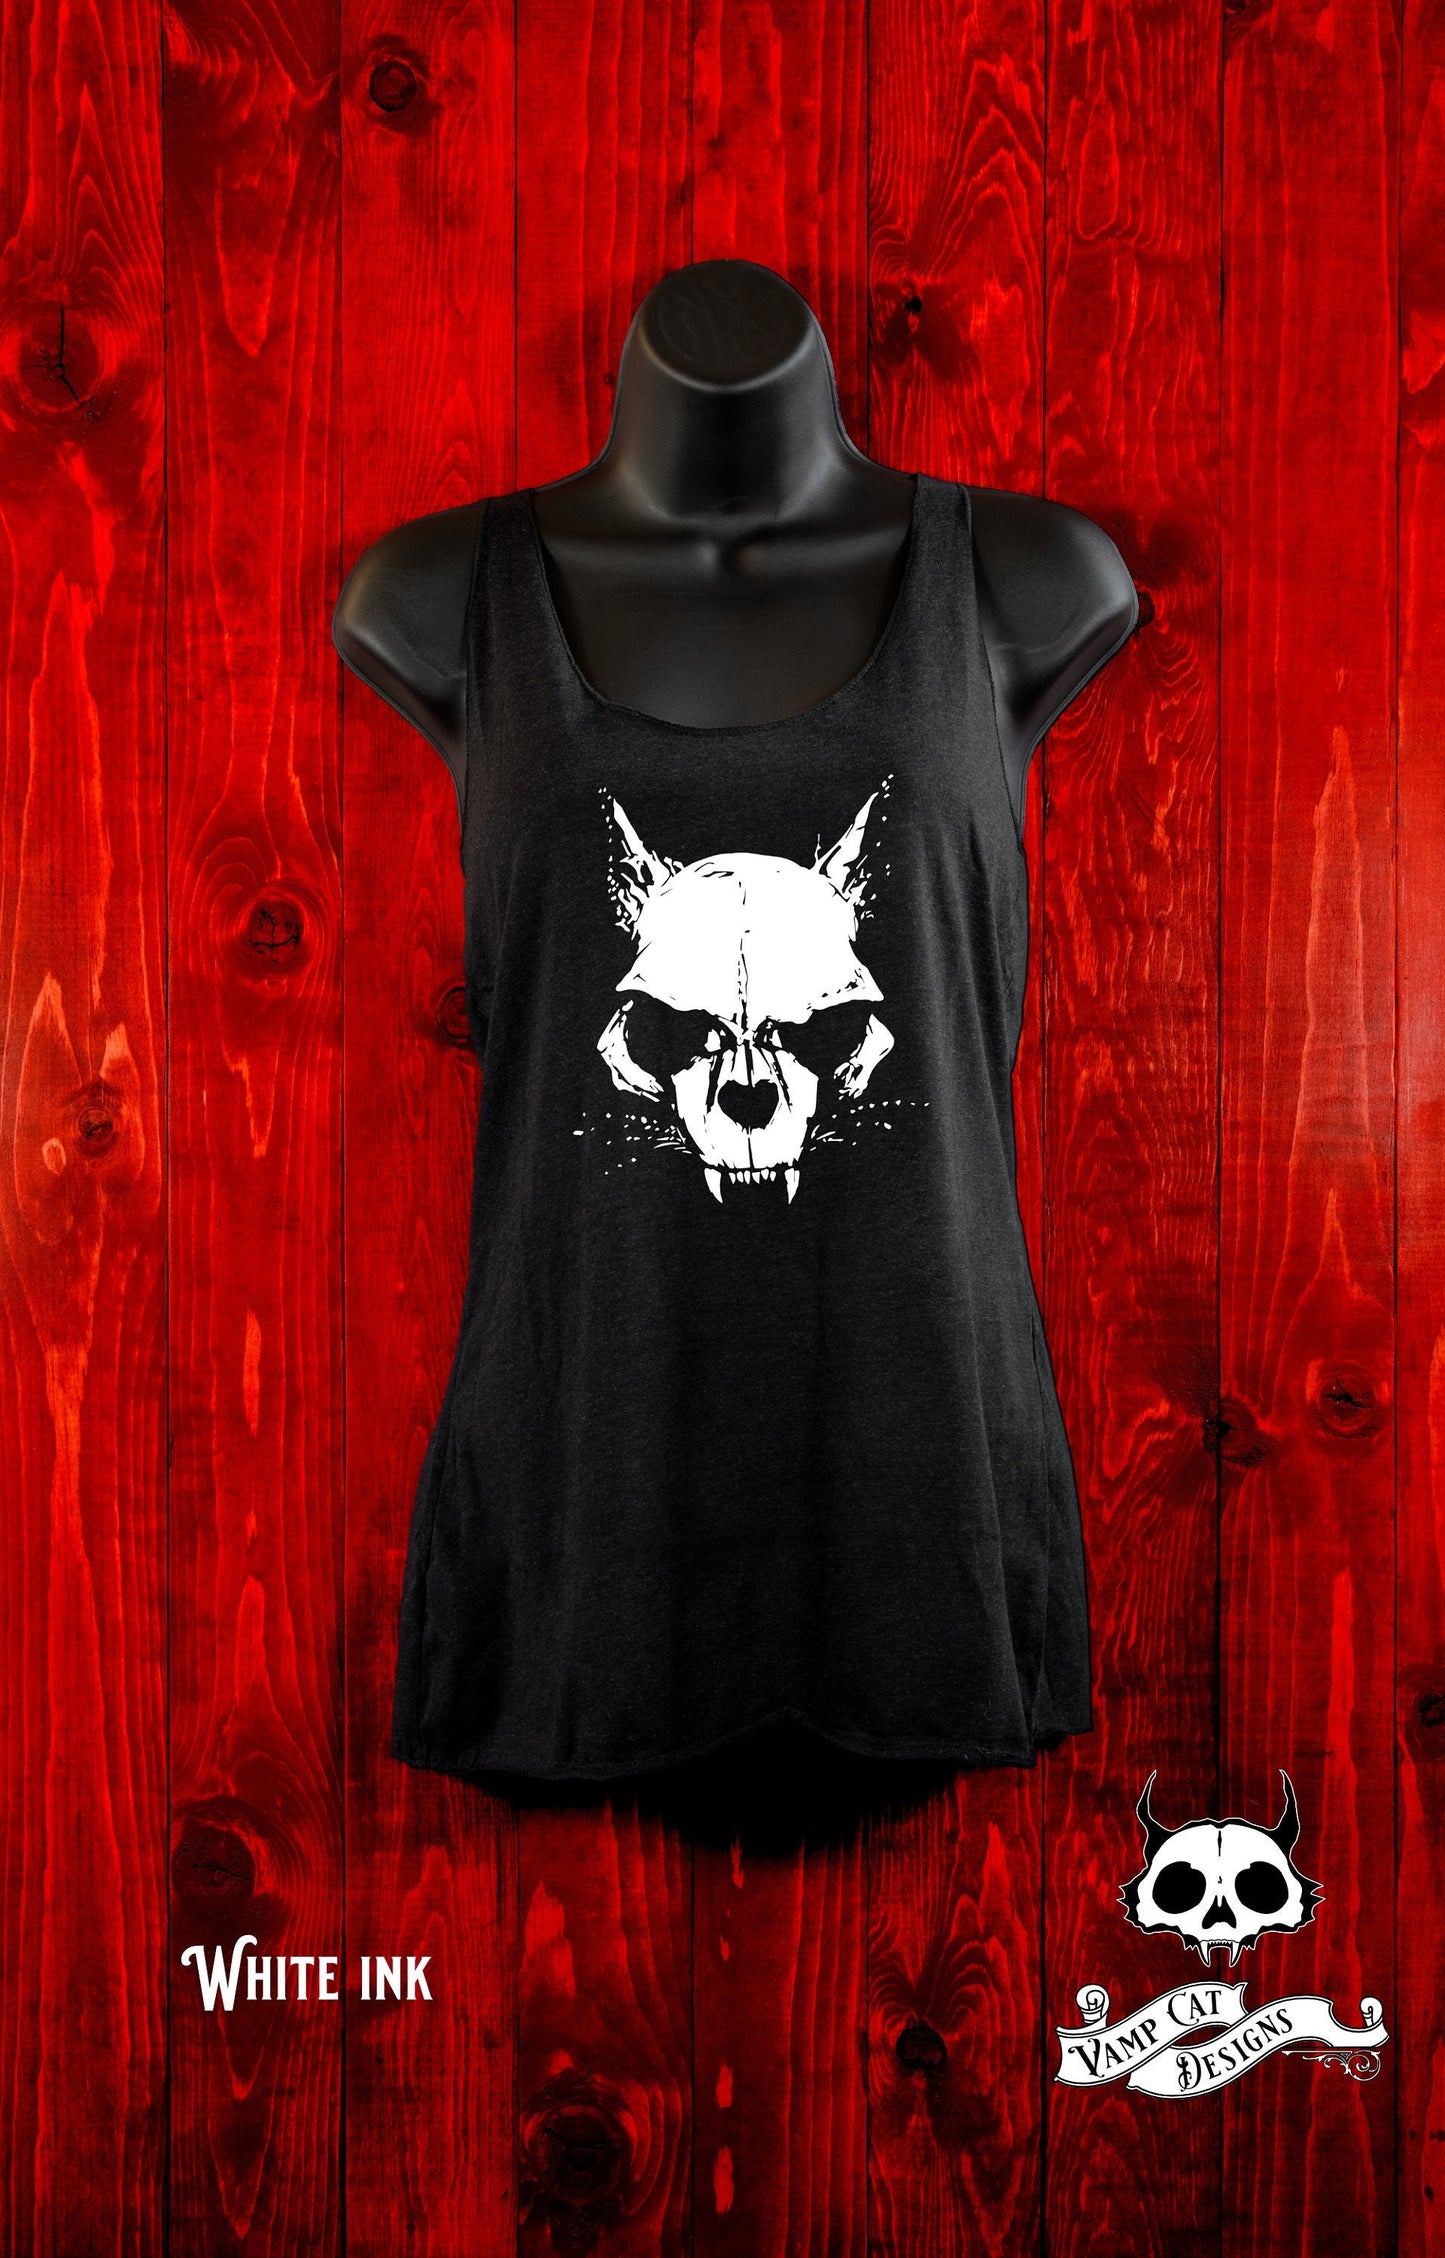 Skull Cat -Tank Top-Dark Apparel-Art Top-Cats-Skulls-Cat art-Evil Cat-Witchy-Comfy Tank-Gifts For Her-Cat Lovers-Casual Wear-Gothic Gifts